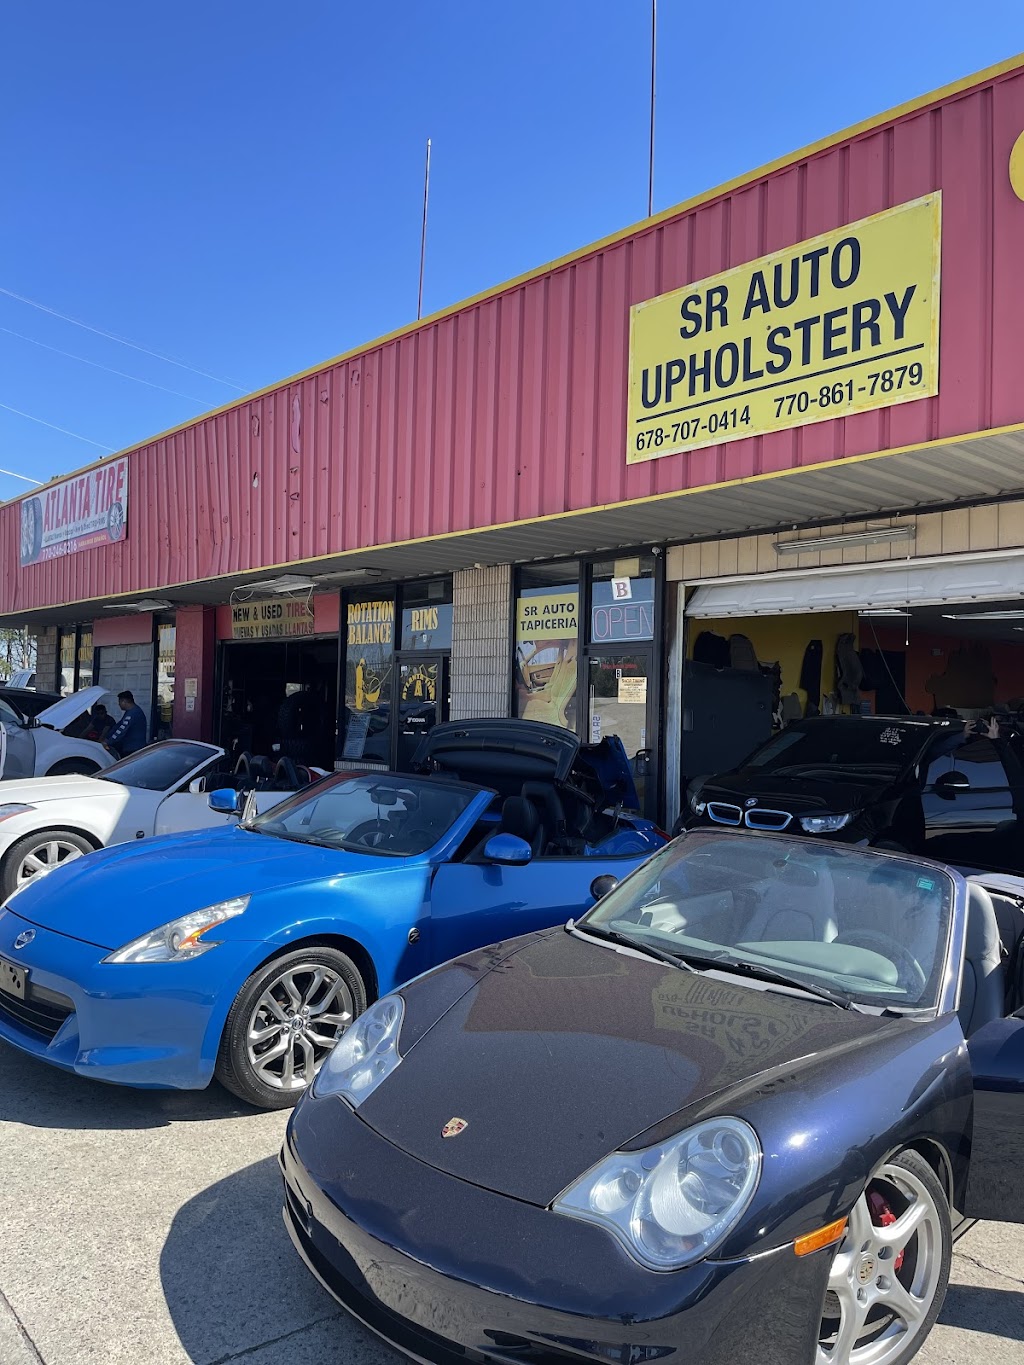 SR Auto upholstery electrical repair | next to unique auto used car dealers, 6290 Buford Hwy suite b, Norcross, GA 30071, USA | Phone: (678) 707-0414